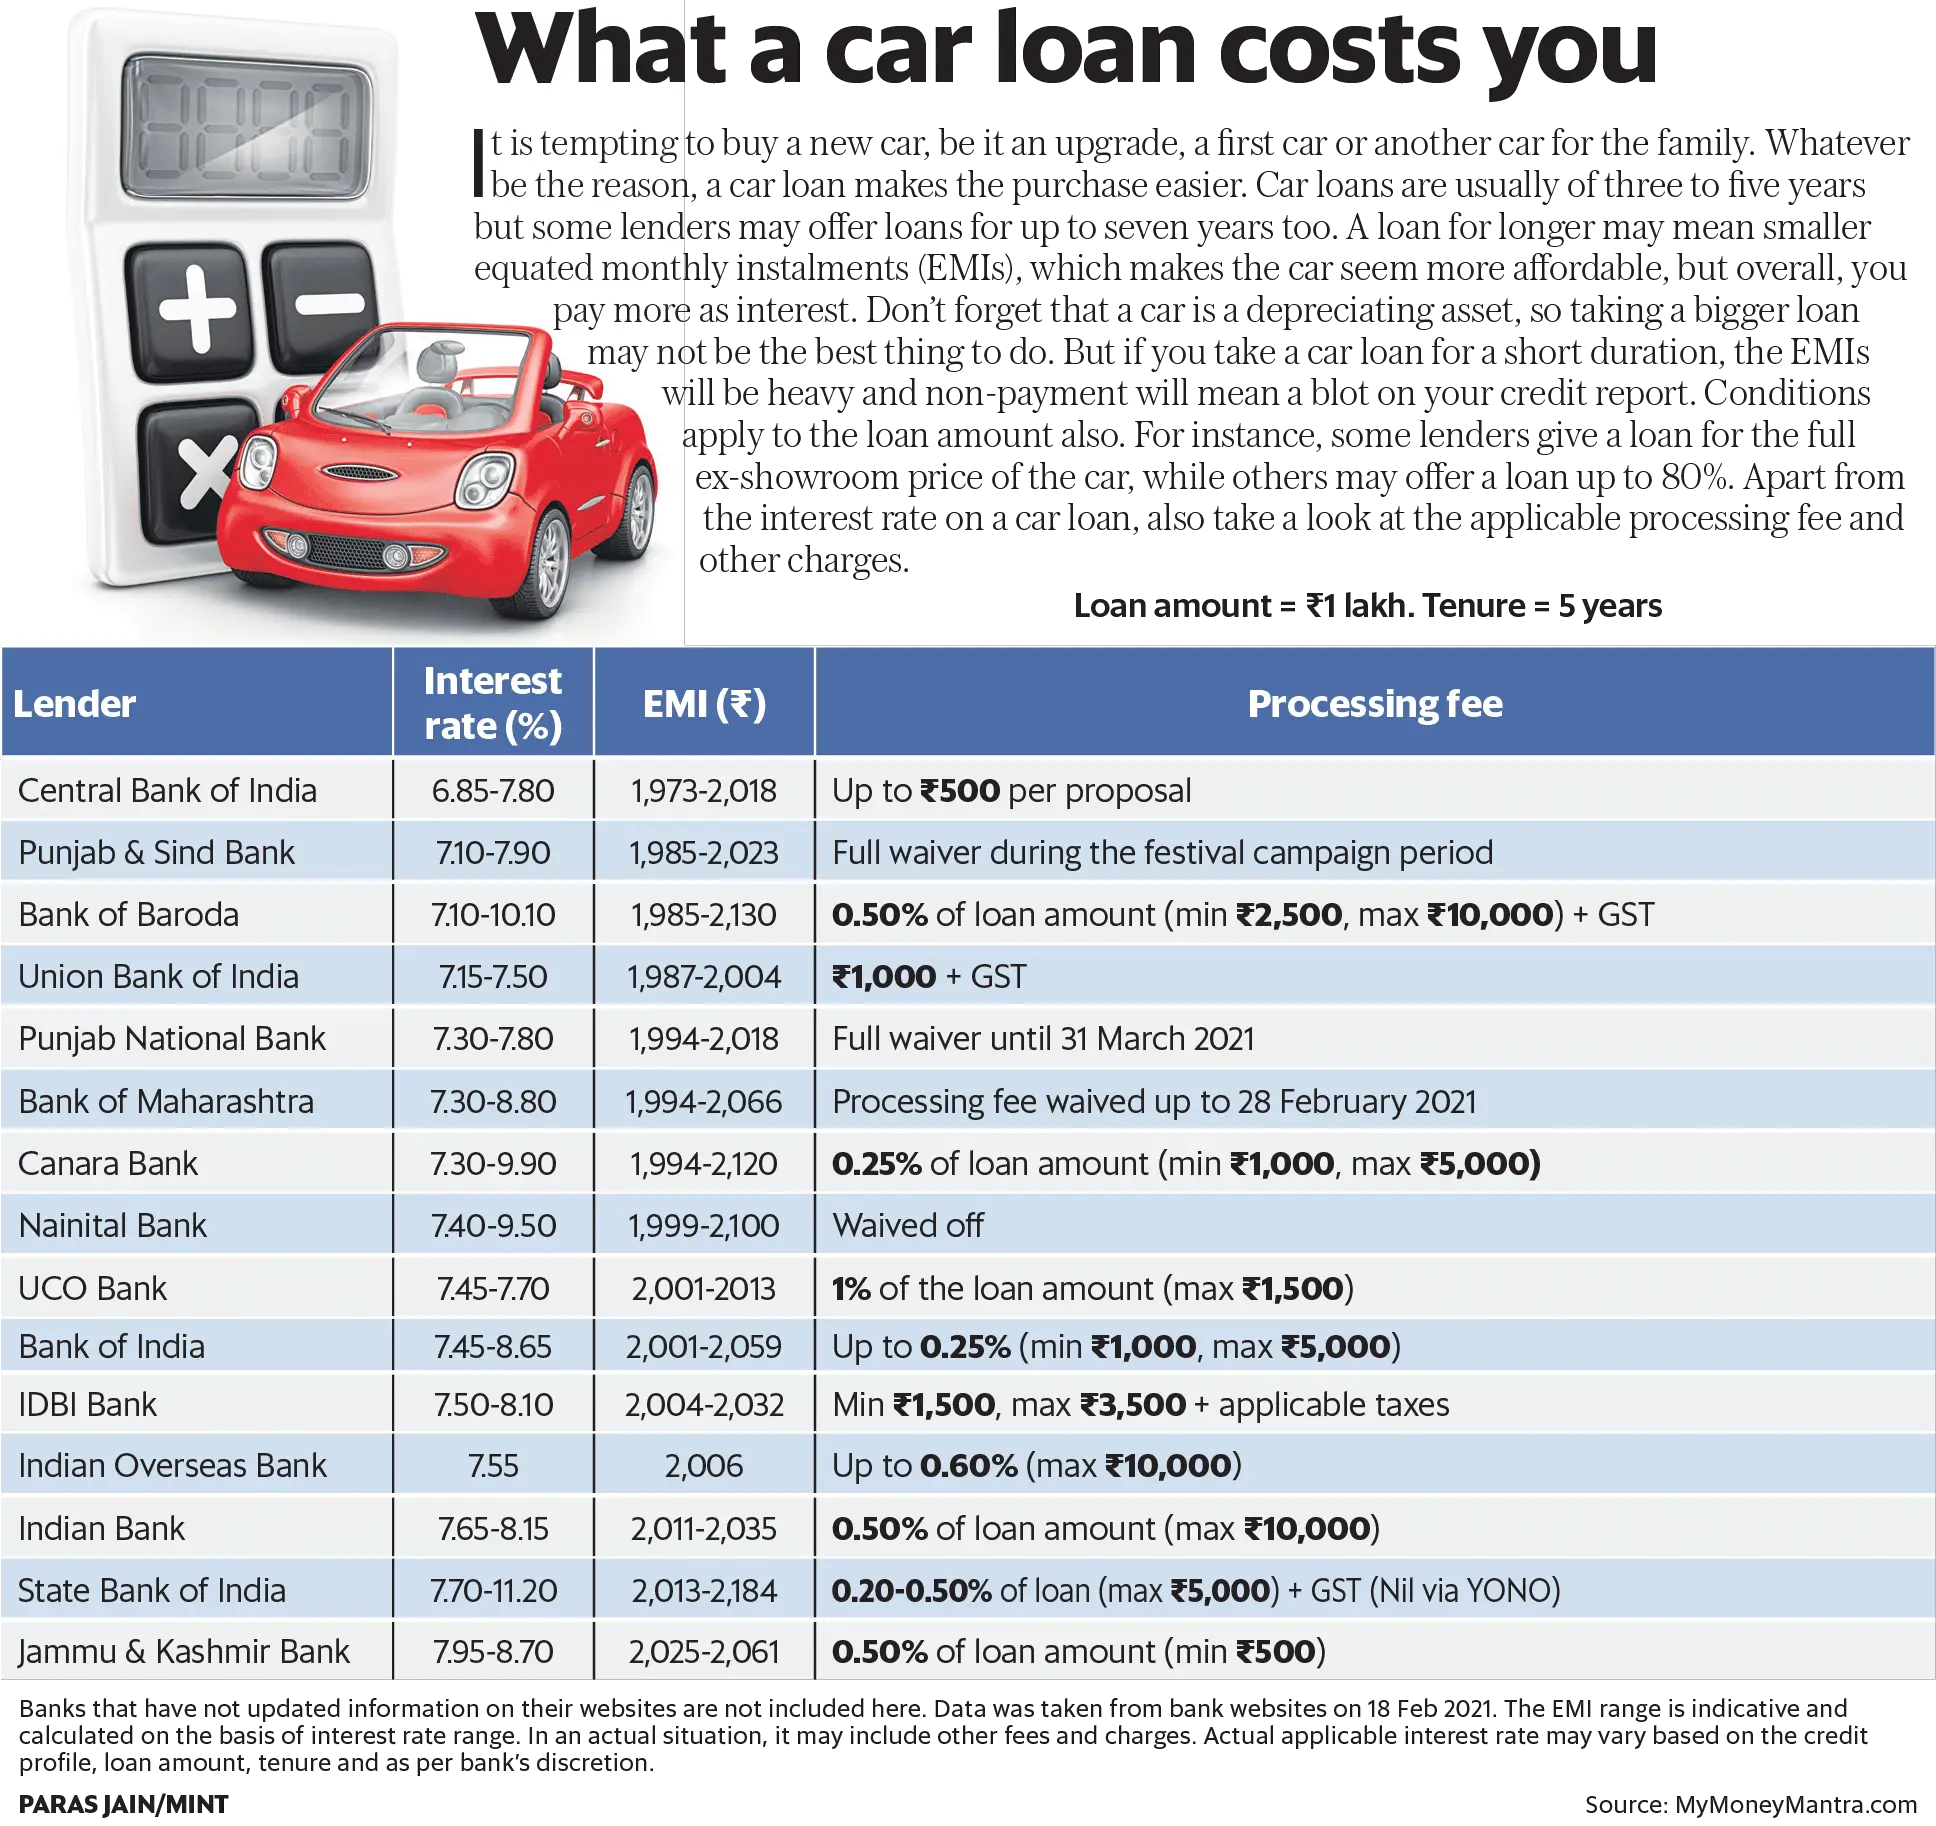 What a car loan costs you